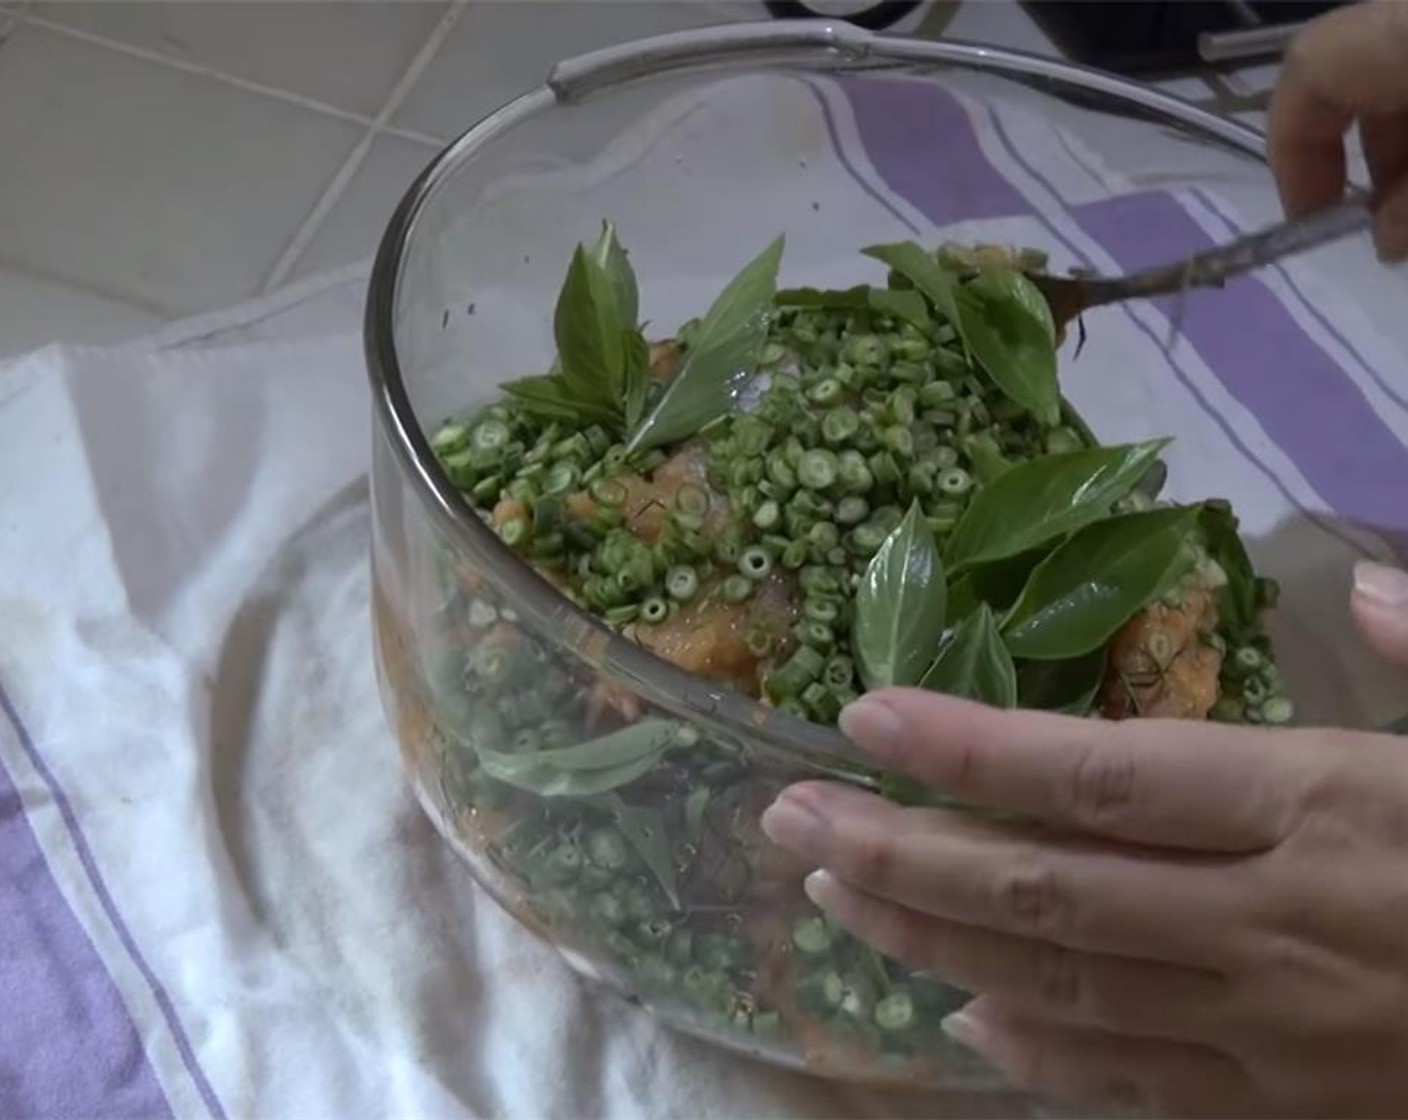 step 2 Into a bowl, mix the tilapia, Fish Sauce (1/2 Tbsp), Granulated Sugar (1 Tbsp), Green Beans (1 cup), Kaffir Lime Leaves (2 Tbsp), and Fresh Thai Basil Leaves (1 cup). The fish has to be wet. If on the dry side mix in the Egg (1).